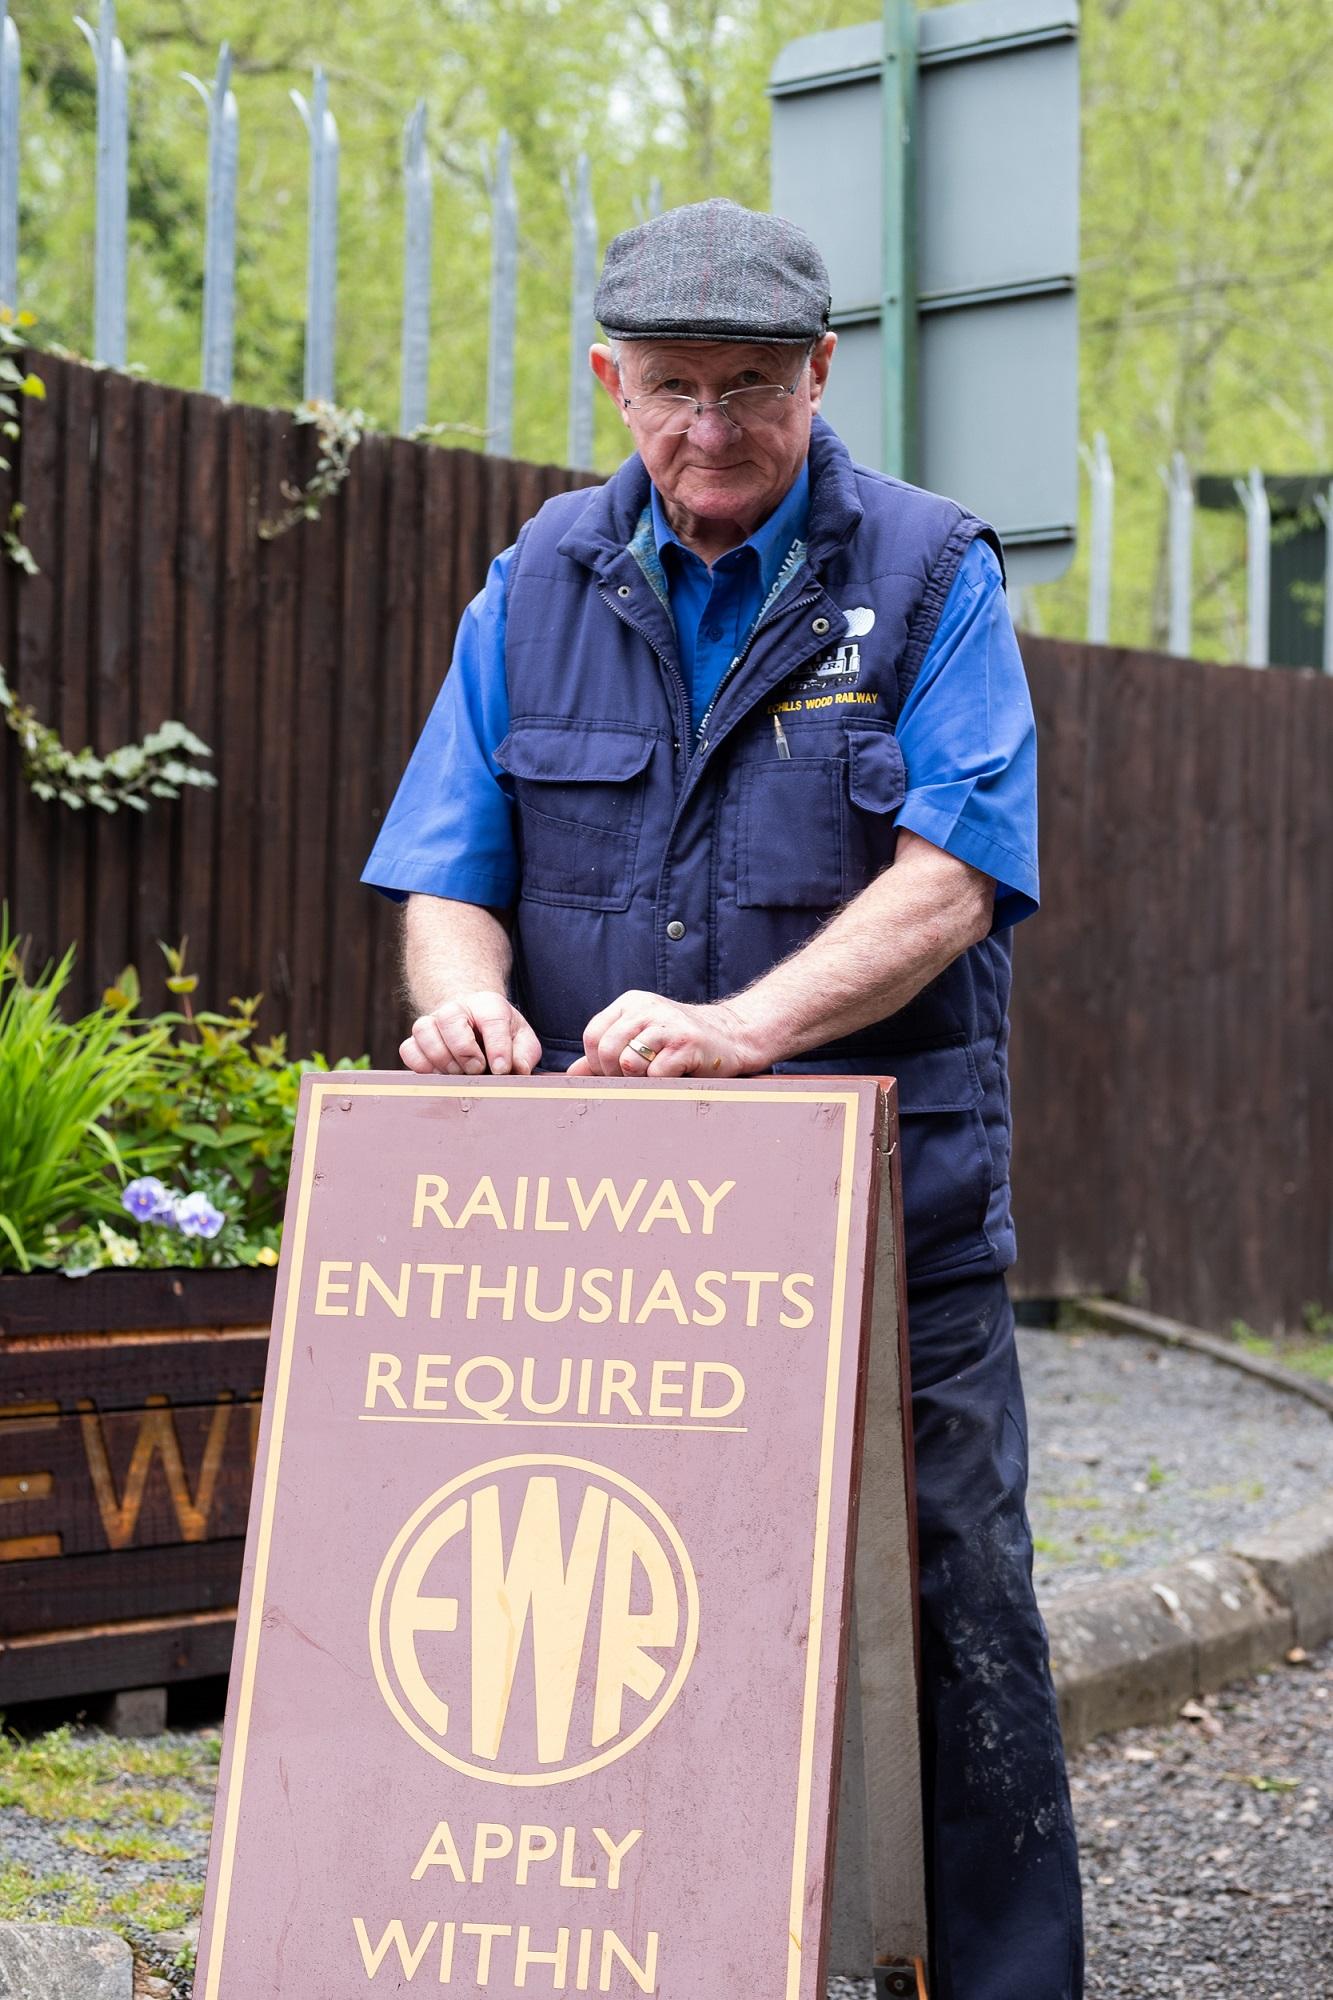 Photograph of Jeff Stevens, Secretary of the Echills Wood Railway, standing in front of a sign which invites volunteers to join.